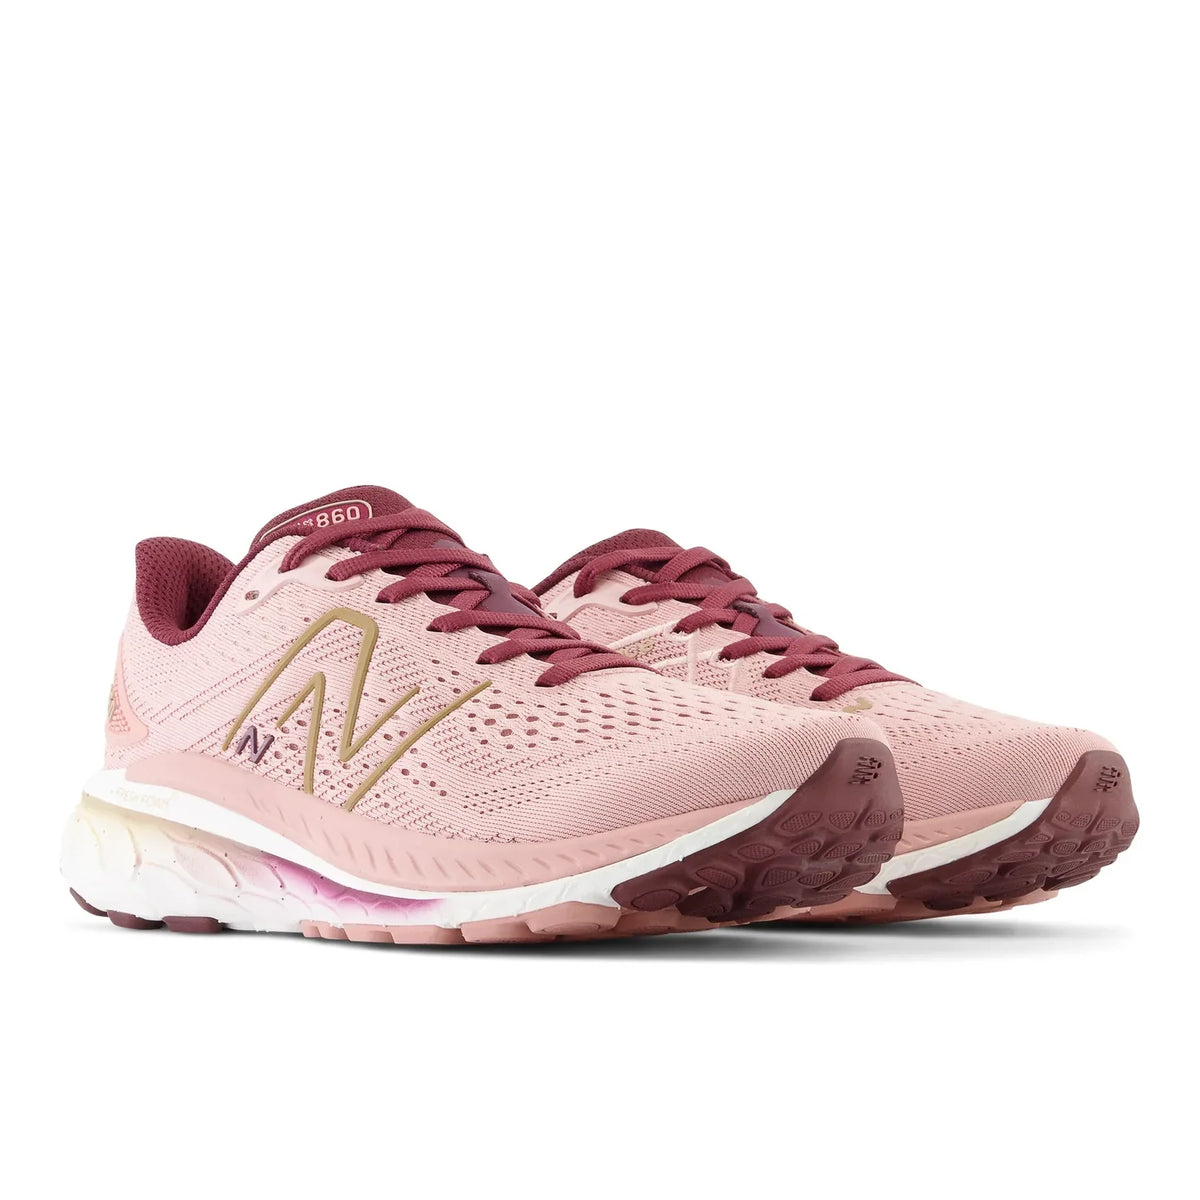 NB Lifestyle Shoes Women Pink Moon